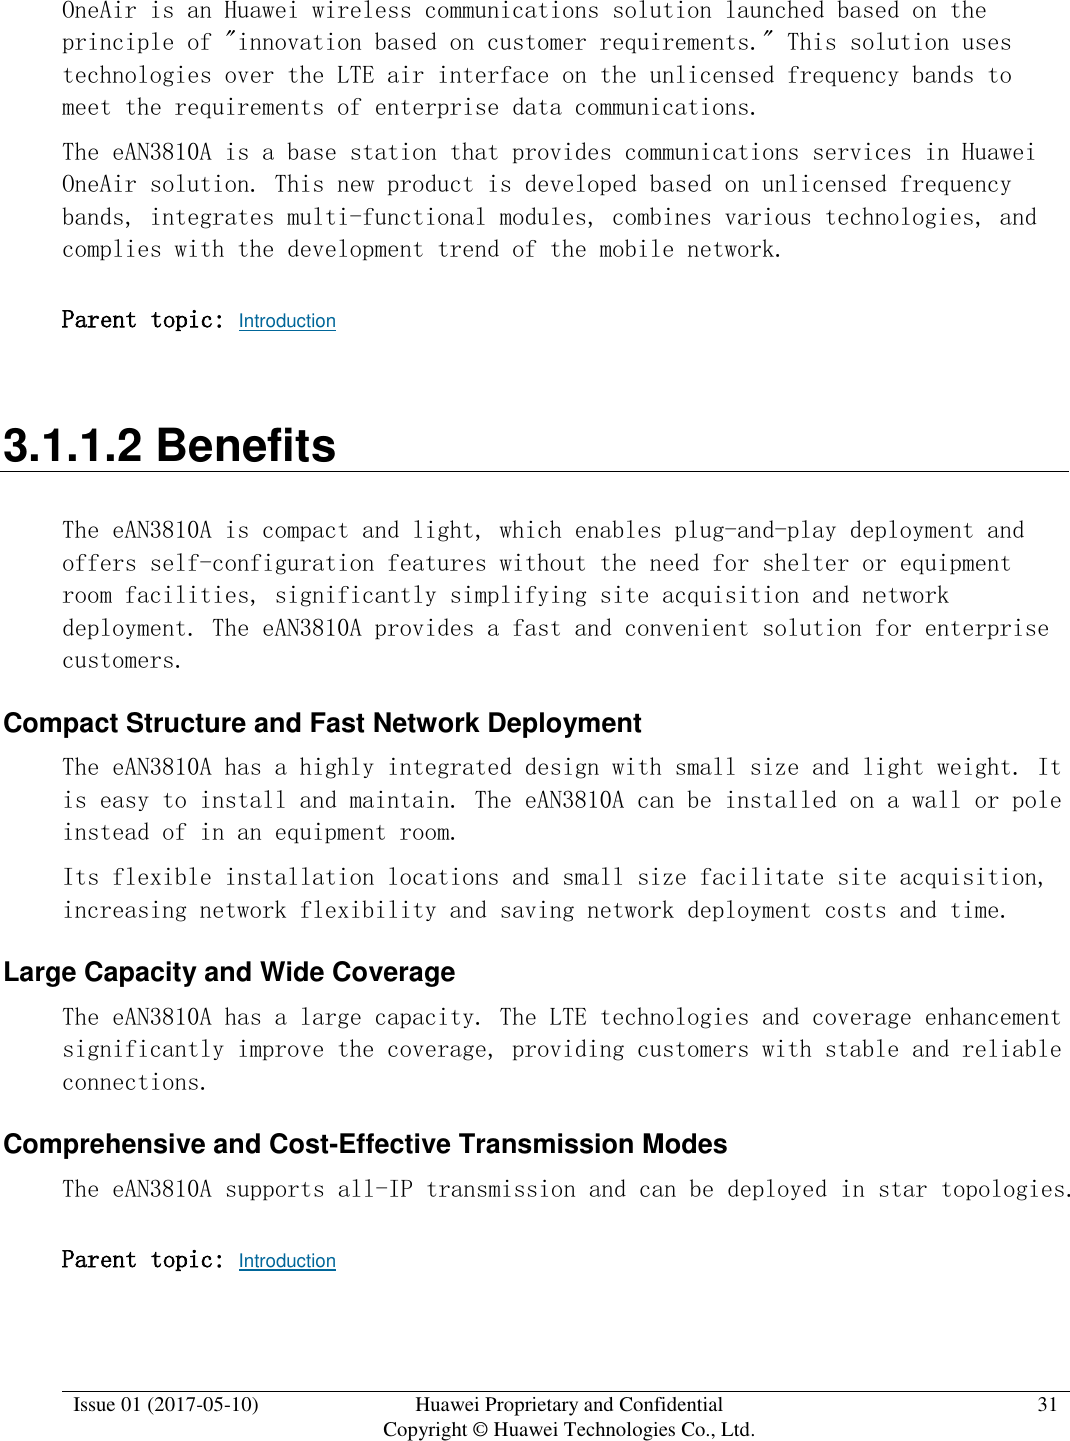  Issue 01 (2017-05-10) Huawei Proprietary and Confidential      Copyright © Huawei Technologies Co., Ltd. 31  OneAir is an Huawei wireless communications solution launched based on the principle of &quot;innovation based on customer requirements.&quot; This solution uses technologies over the LTE air interface on the unlicensed frequency bands to meet the requirements of enterprise data communications. The eAN3810A is a base station that provides communications services in Huawei OneAir solution. This new product is developed based on unlicensed frequency bands, integrates multi-functional modules, combines various technologies, and complies with the development trend of the mobile network. Parent topic: Introduction 3.1.1.2 Benefits The eAN3810A is compact and light, which enables plug-and-play deployment and offers self-configuration features without the need for shelter or equipment room facilities, significantly simplifying site acquisition and network deployment. The eAN3810A provides a fast and convenient solution for enterprise customers. Compact Structure and Fast Network Deployment The eAN3810A has a highly integrated design with small size and light weight. It is easy to install and maintain. The eAN3810A can be installed on a wall or pole instead of in an equipment room. Its flexible installation locations and small size facilitate site acquisition, increasing network flexibility and saving network deployment costs and time. Large Capacity and Wide Coverage The eAN3810A has a large capacity. The LTE technologies and coverage enhancement significantly improve the coverage, providing customers with stable and reliable connections. Comprehensive and Cost-Effective Transmission Modes The eAN3810A supports all-IP transmission and can be deployed in star topologies. Parent topic: Introduction 